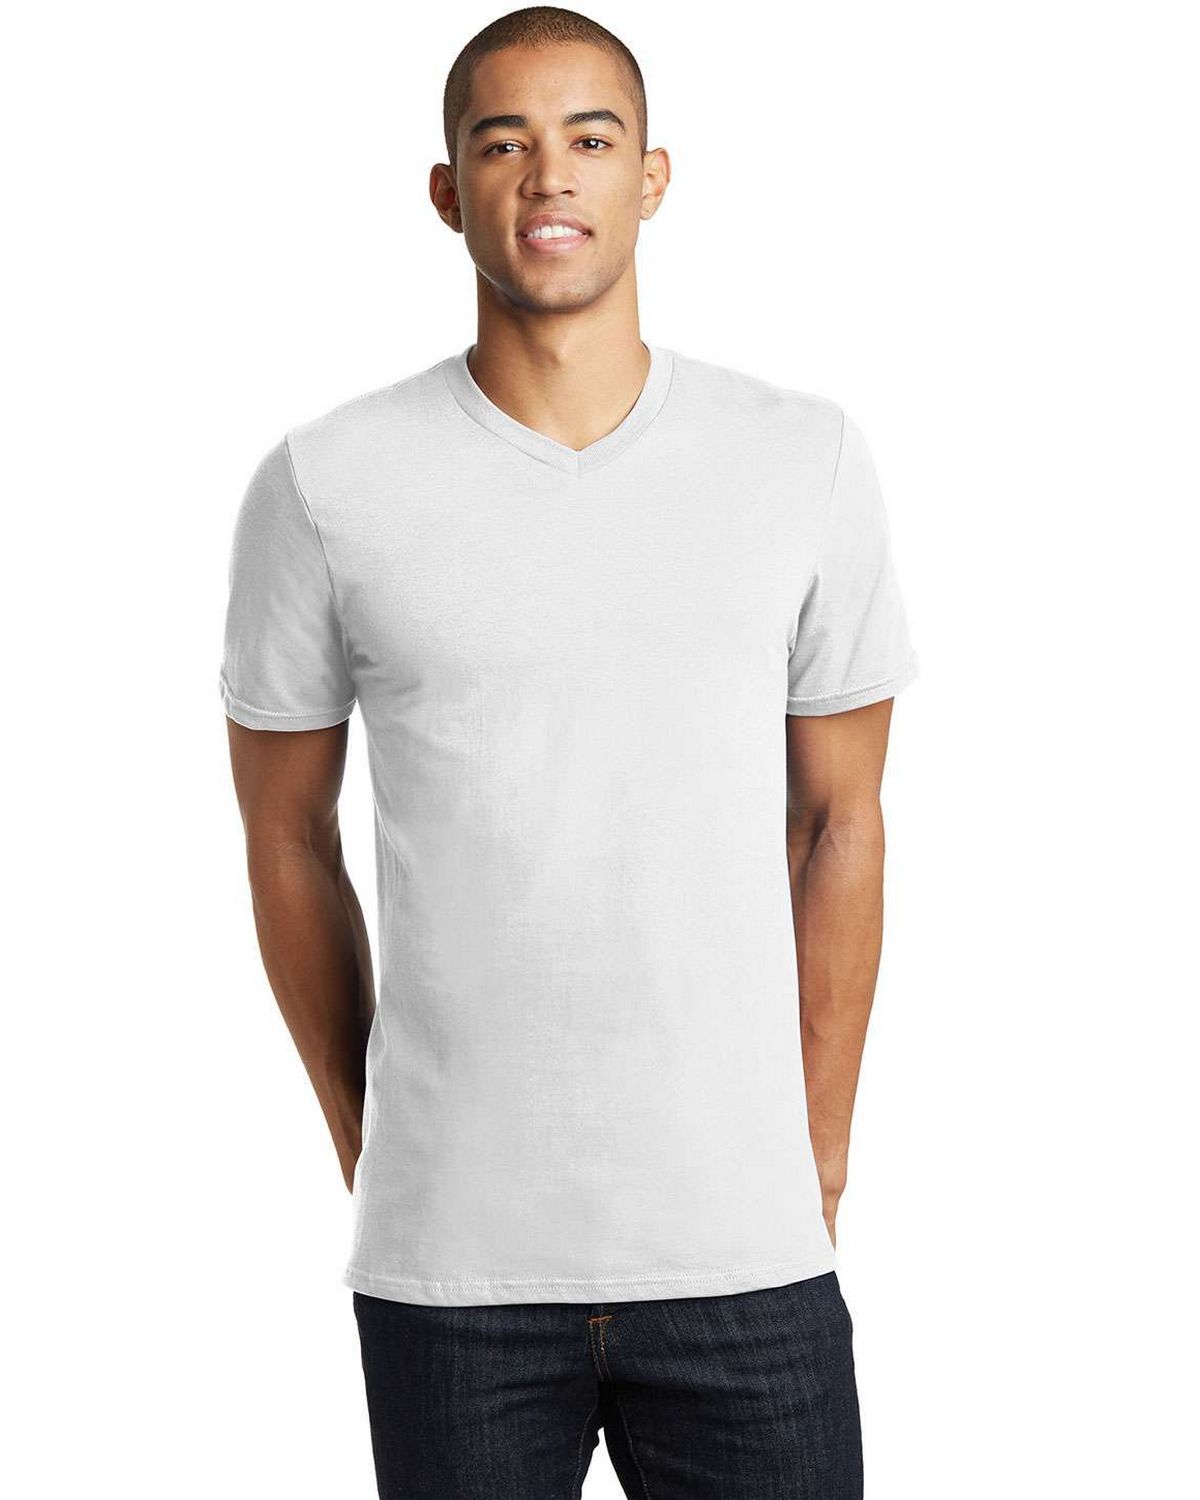 Size Chart for District DT5500 Young Mens The Concert V-Neck Tee